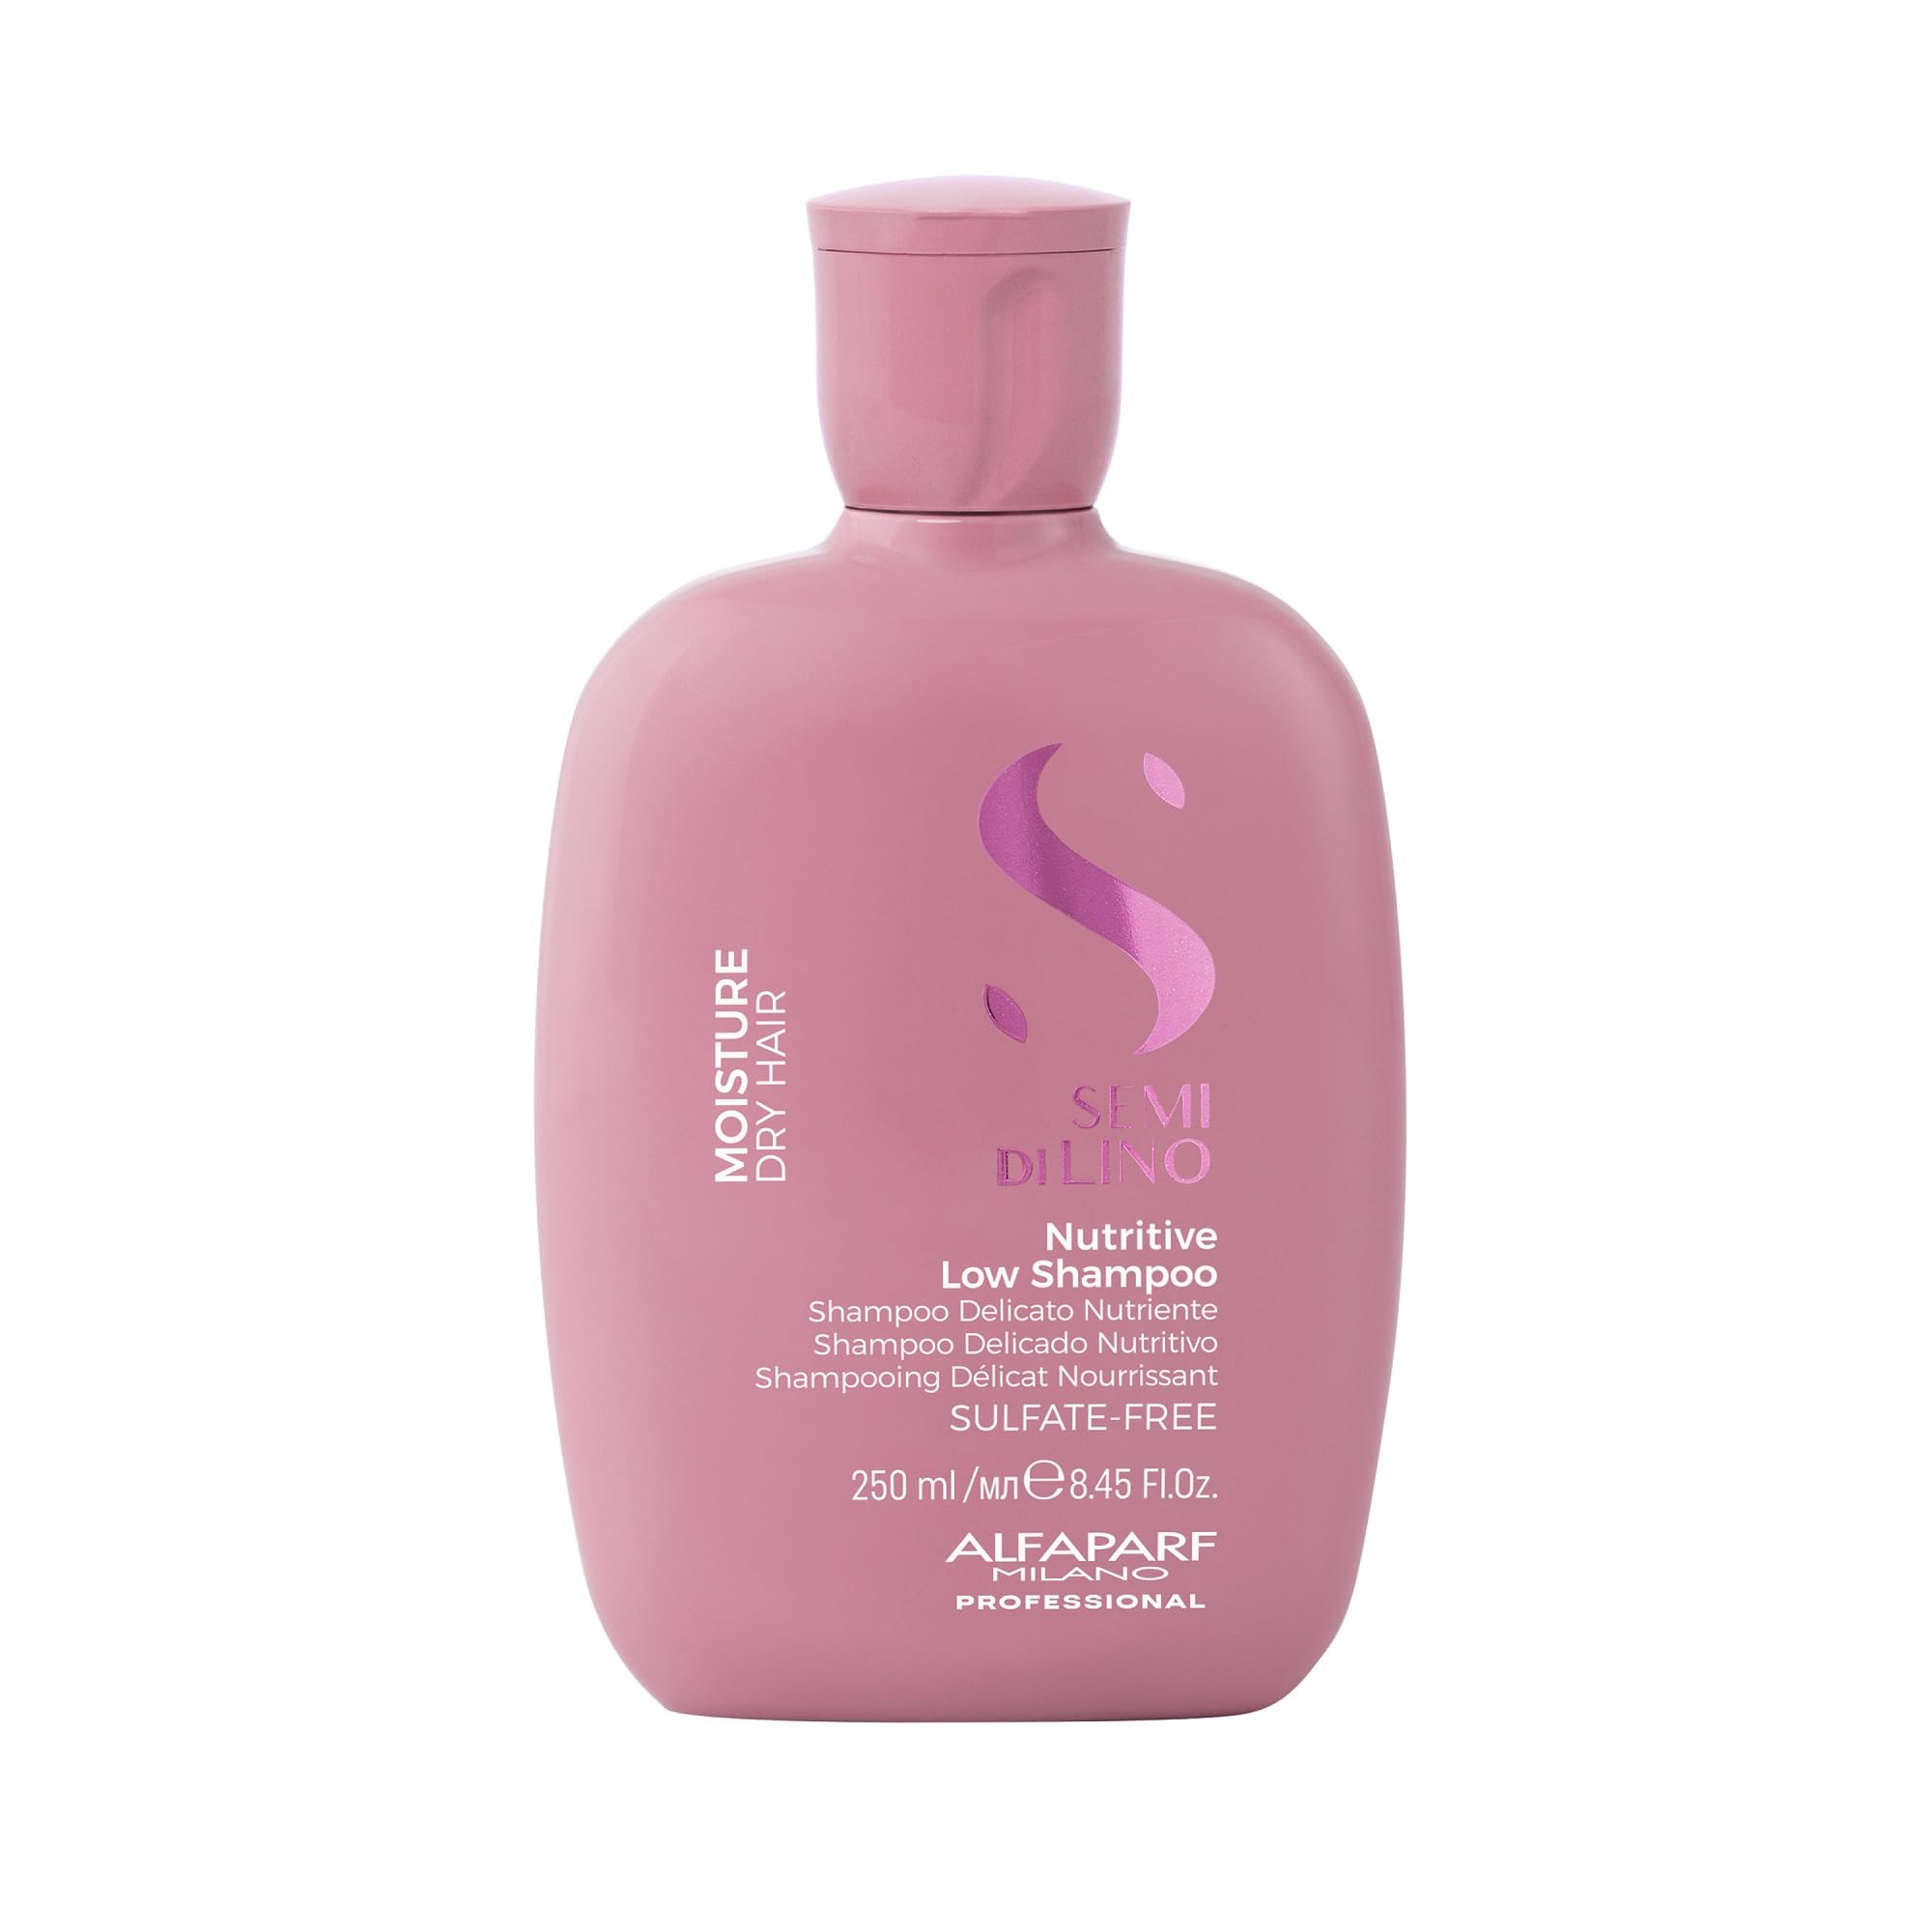 Alfaparf Milano Semi Di Lino Moisture Nutritive Sulfate Free Shampoo for Dry Hair - Paraben and Paraffin Free - Safe on Color Treated Hair - Professional Salon Quality